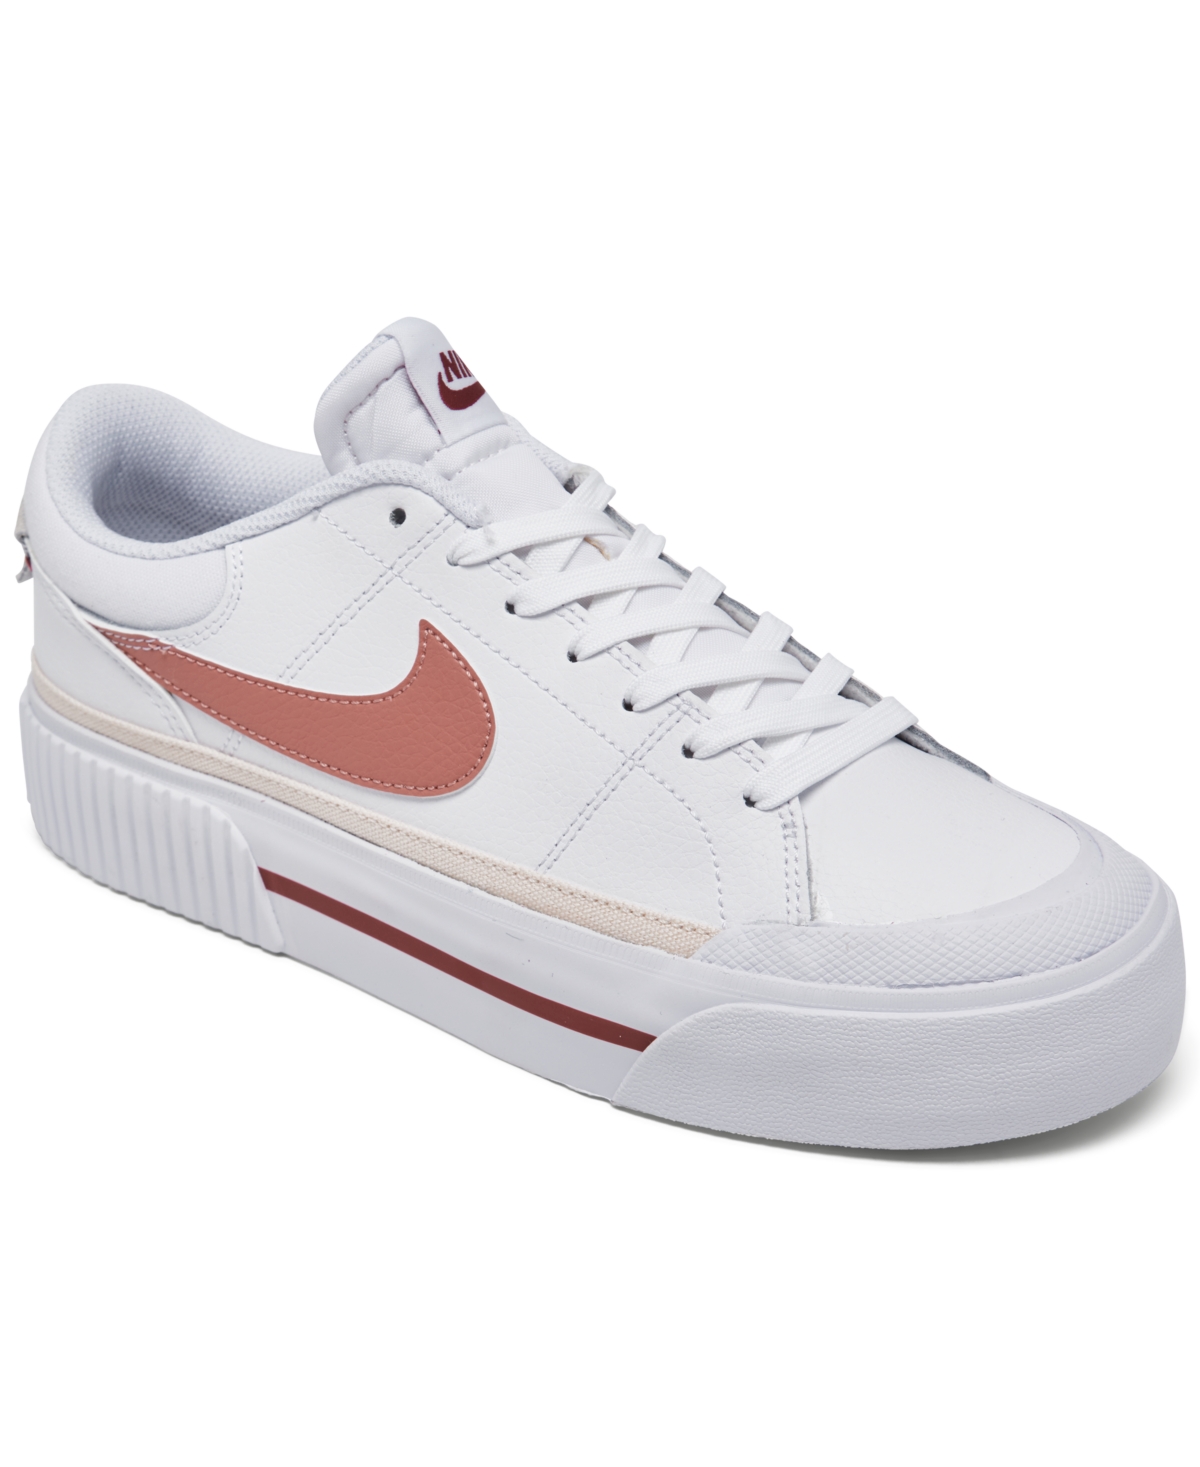 Women's Court Legacy Lift Platform Casual Sneakers from Finish Line - White, Guava Ice, Cedar, Red